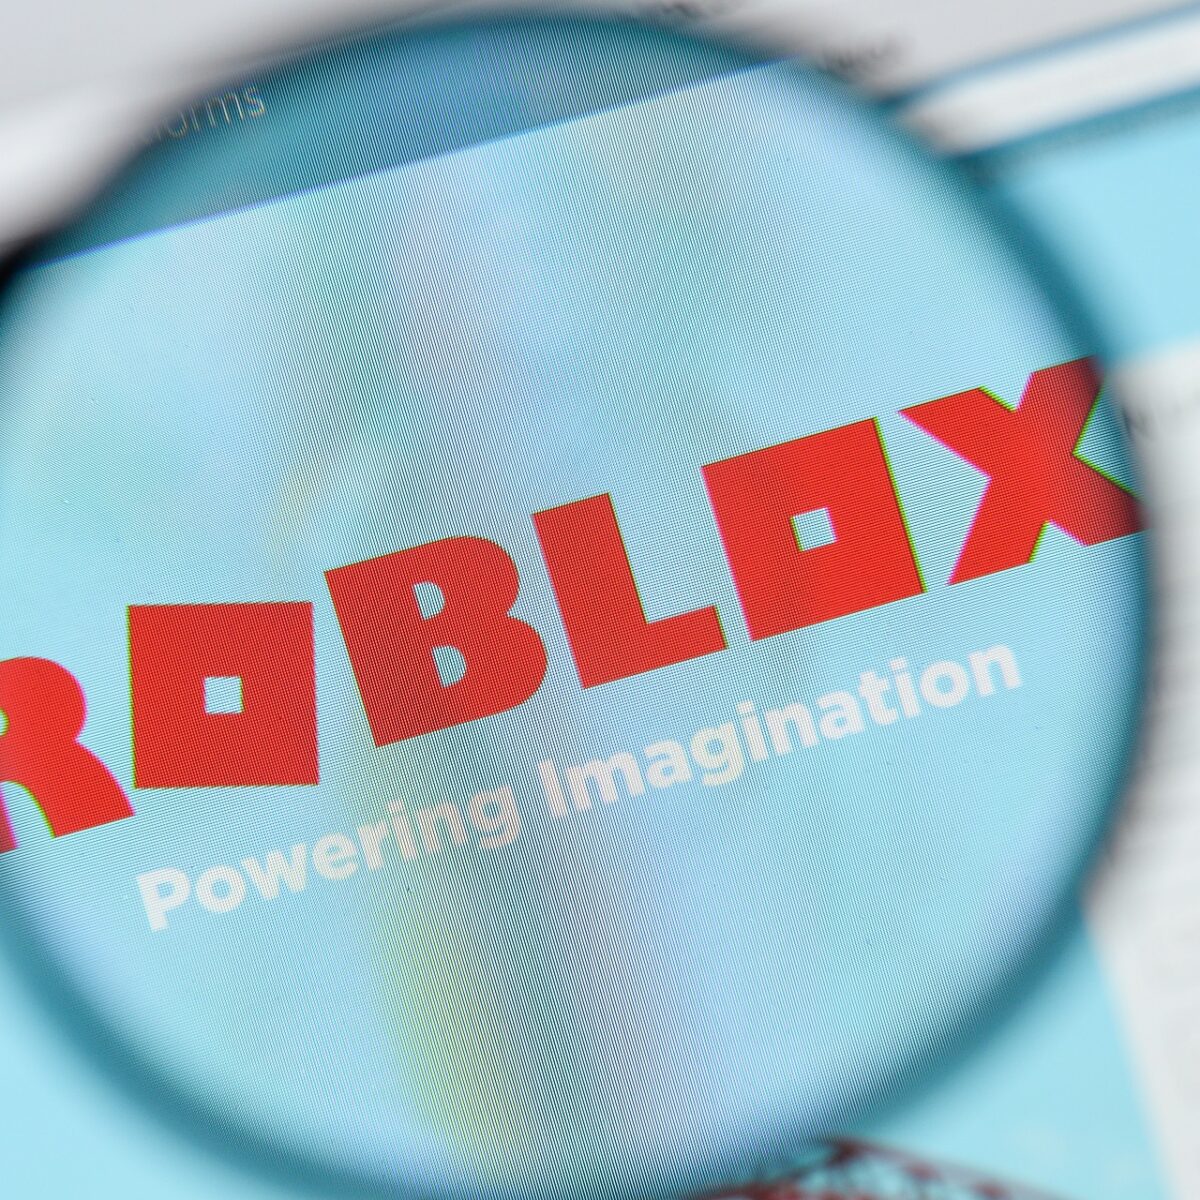 Fix Your Browser Is Not Supported Roblox Error - berryexe has stopped working roblox